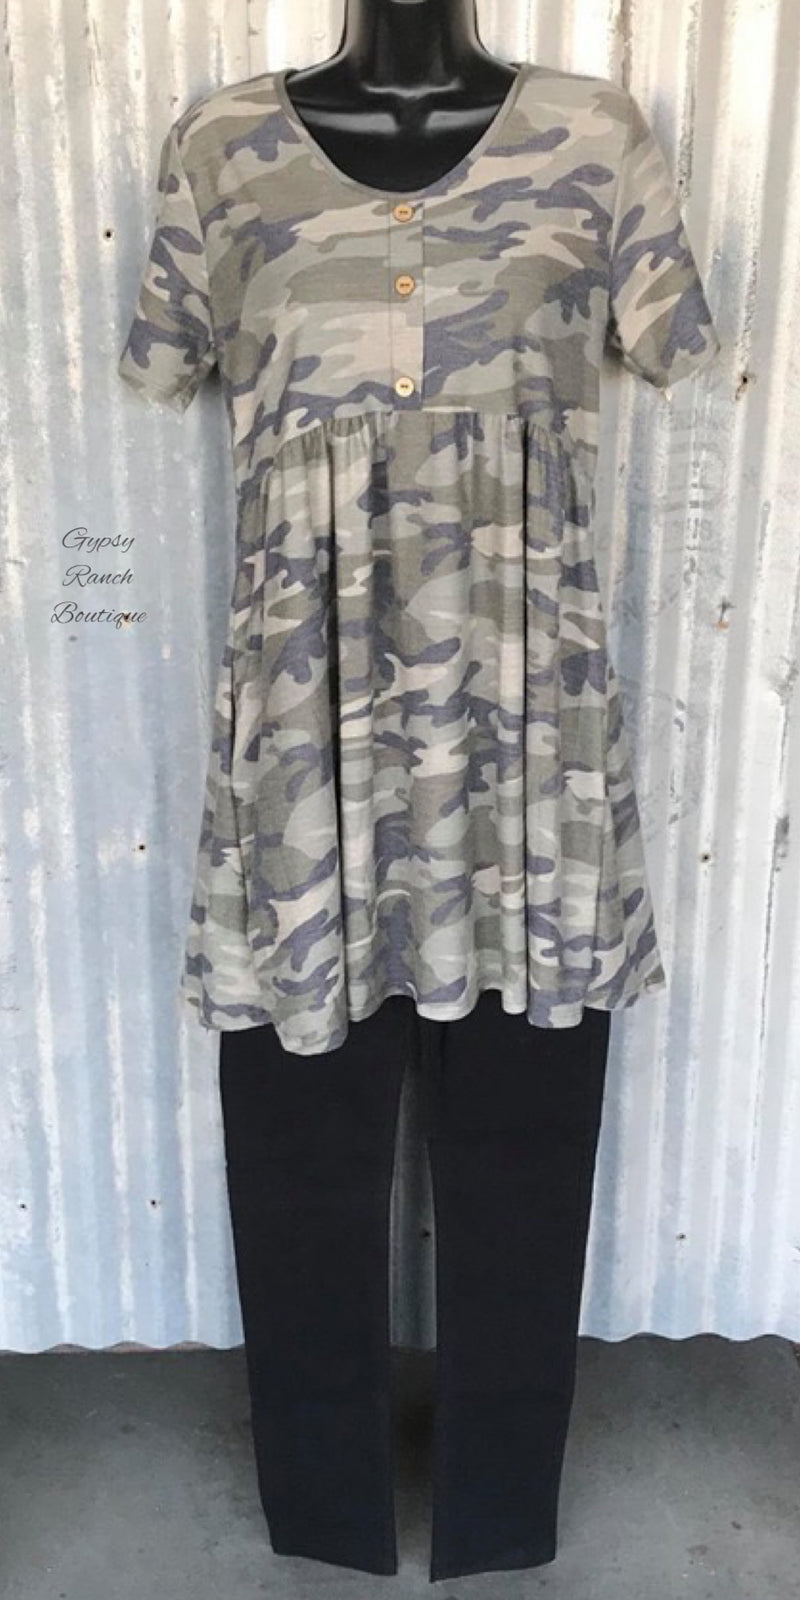 Fire Away Camo Tunic Top - Also in Plus Size